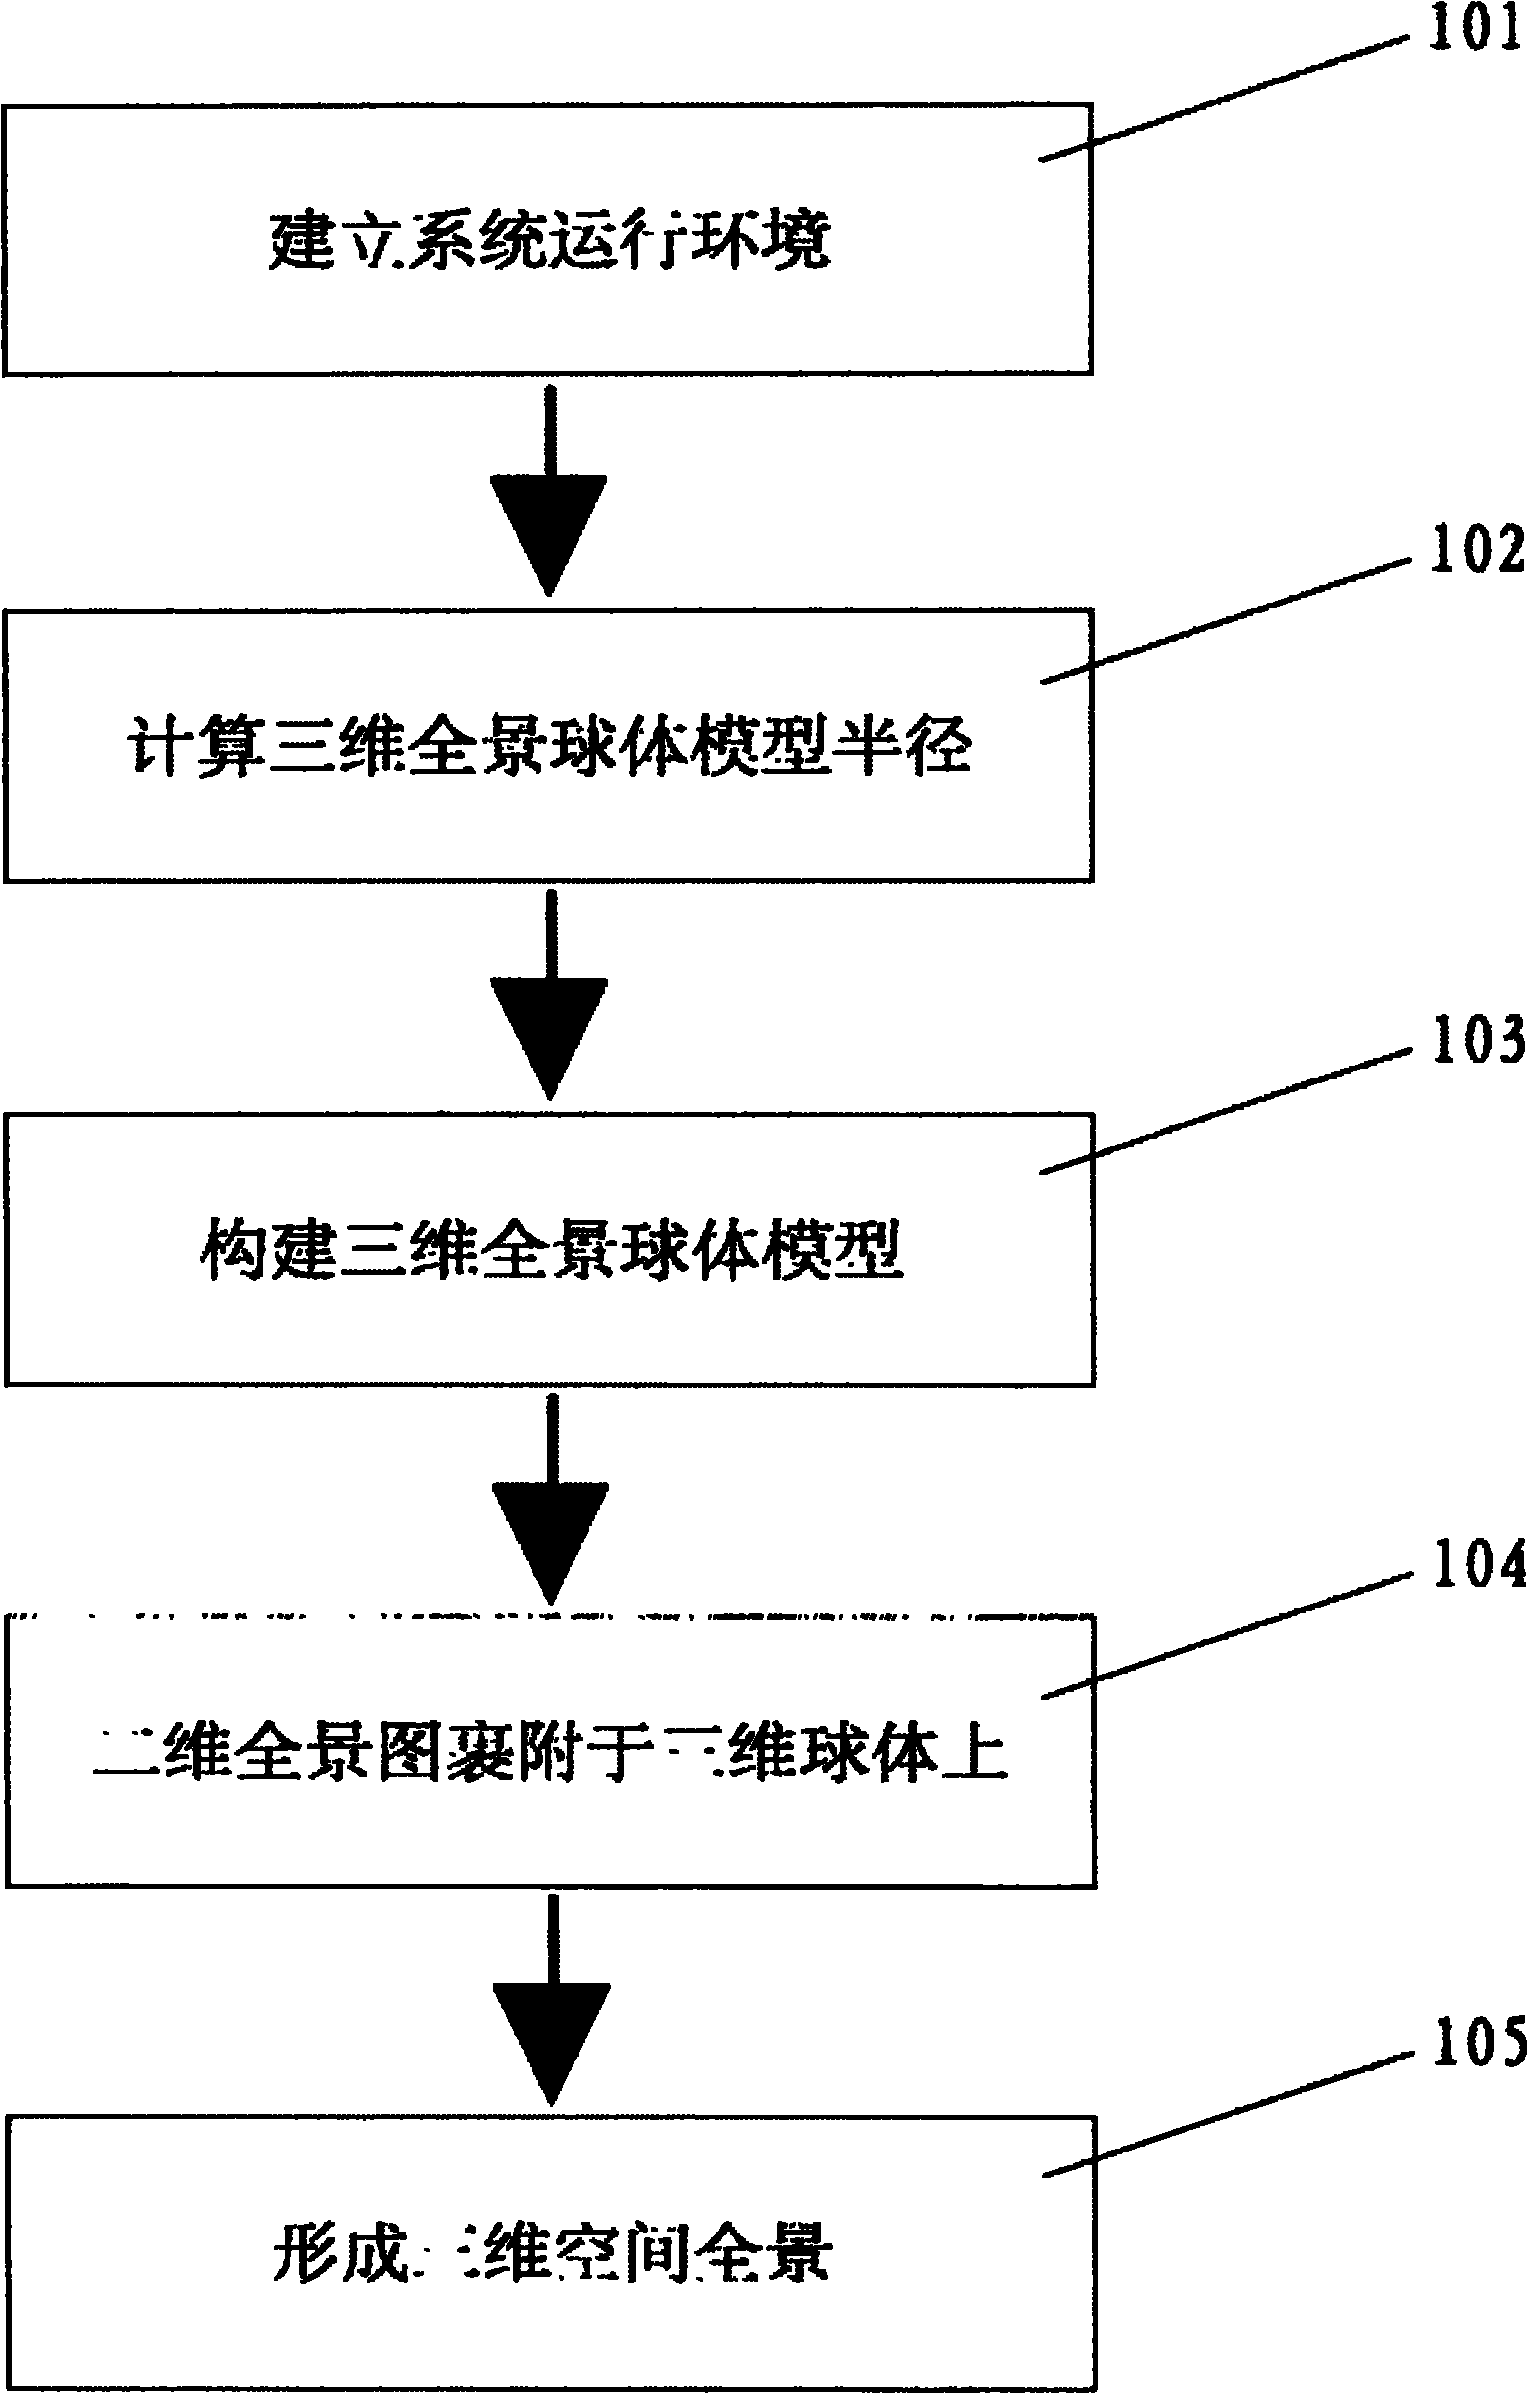 Method and system for browsing panorama by hot spot in three-dimensional panoramic space